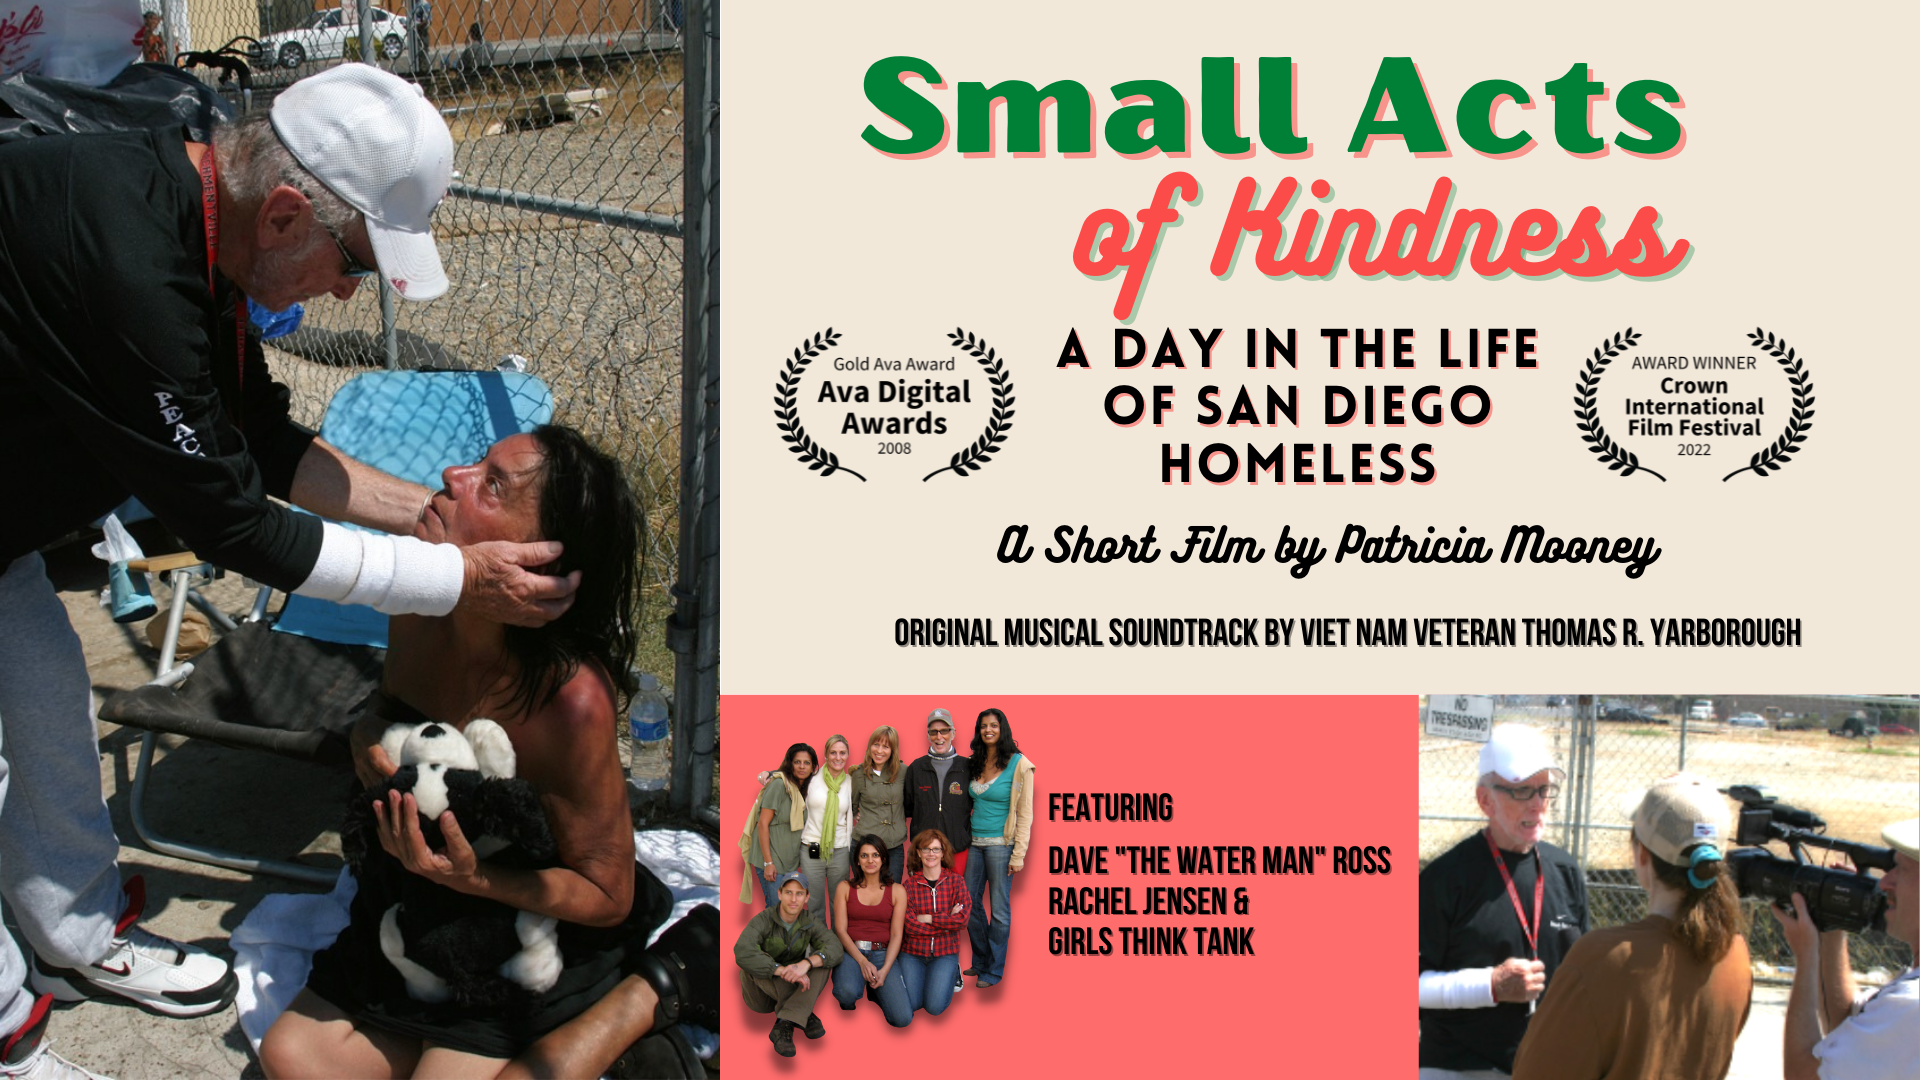 Small Acts of Kindness Award Winning Documentary on San Diego Homeless